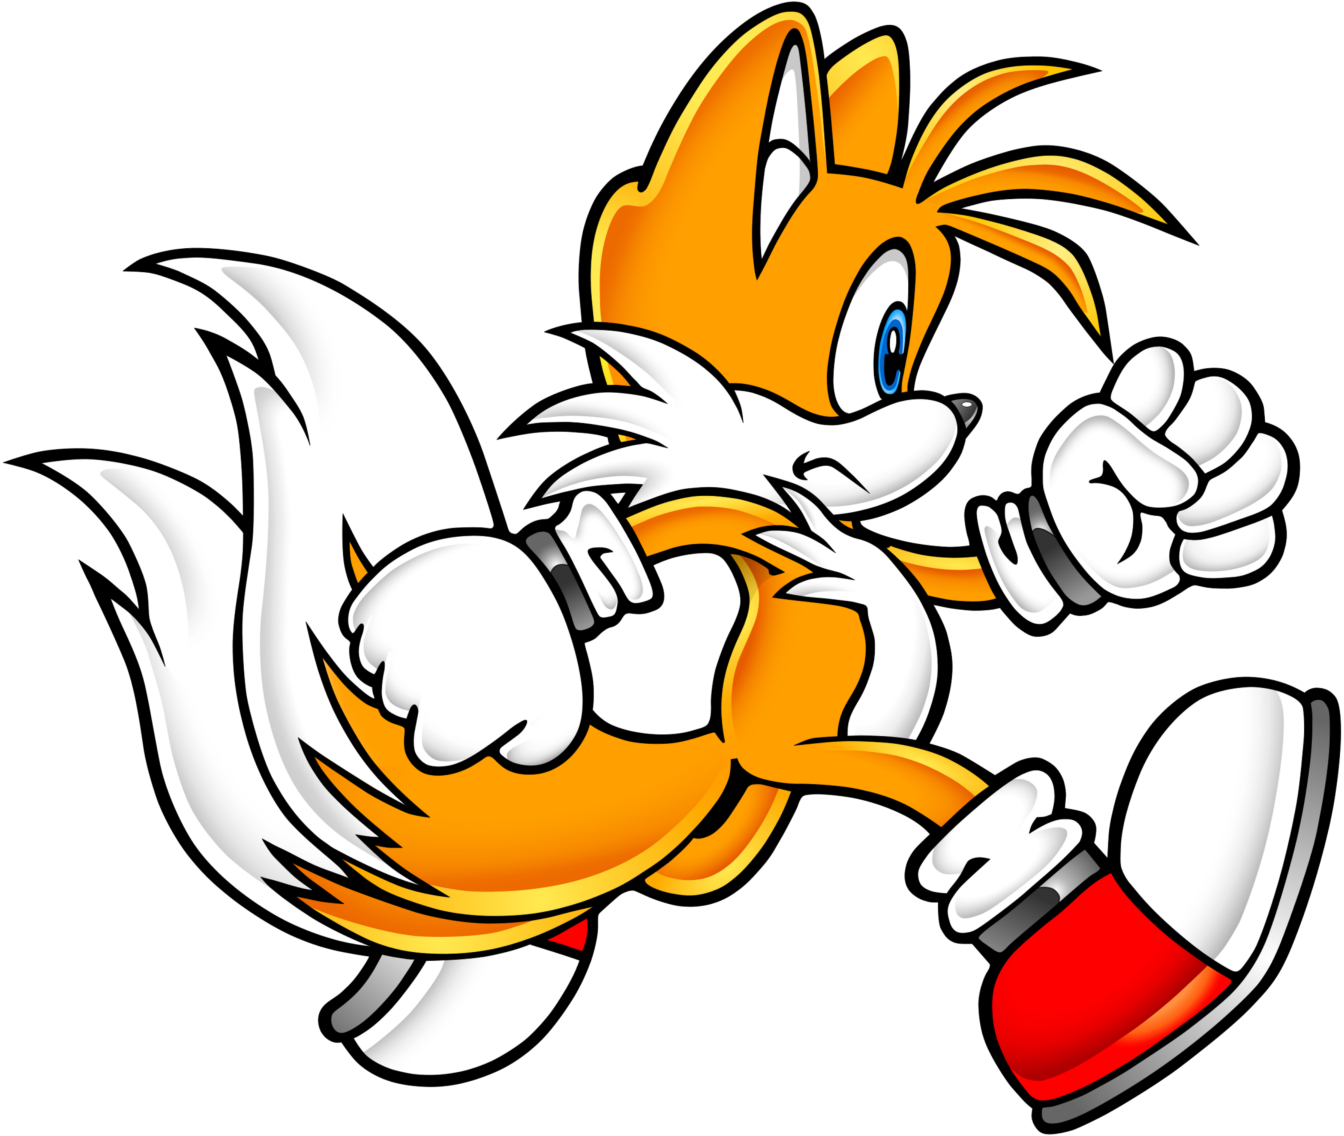 Sa2b Tails Pic0036 - Sonic Adventure 2 Tails Png (1344x1136)